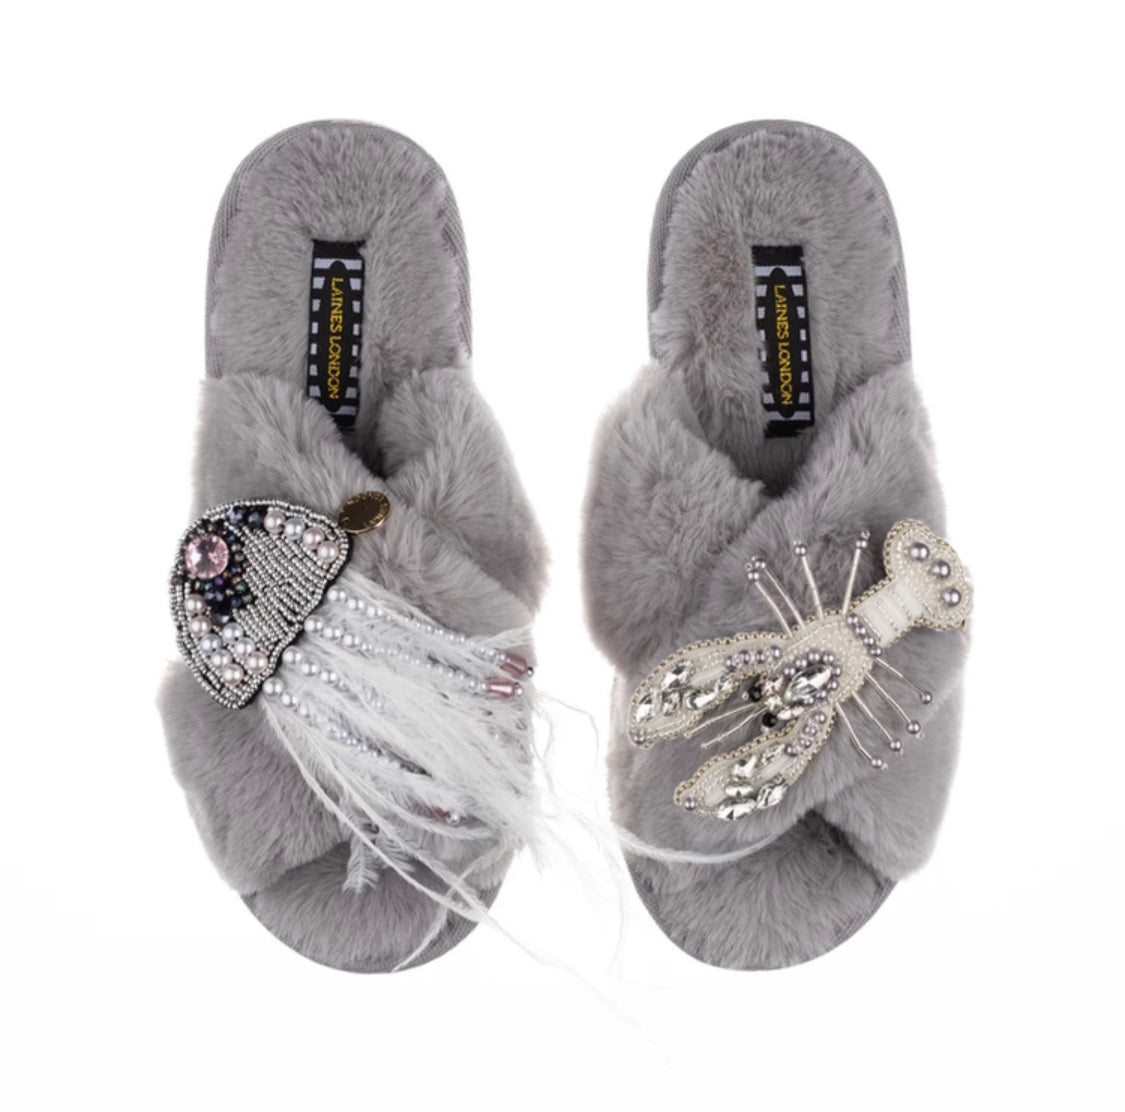 🖤Artisan Double Silver Lobster & Jellyfish on Grey Classic Slippers🖤